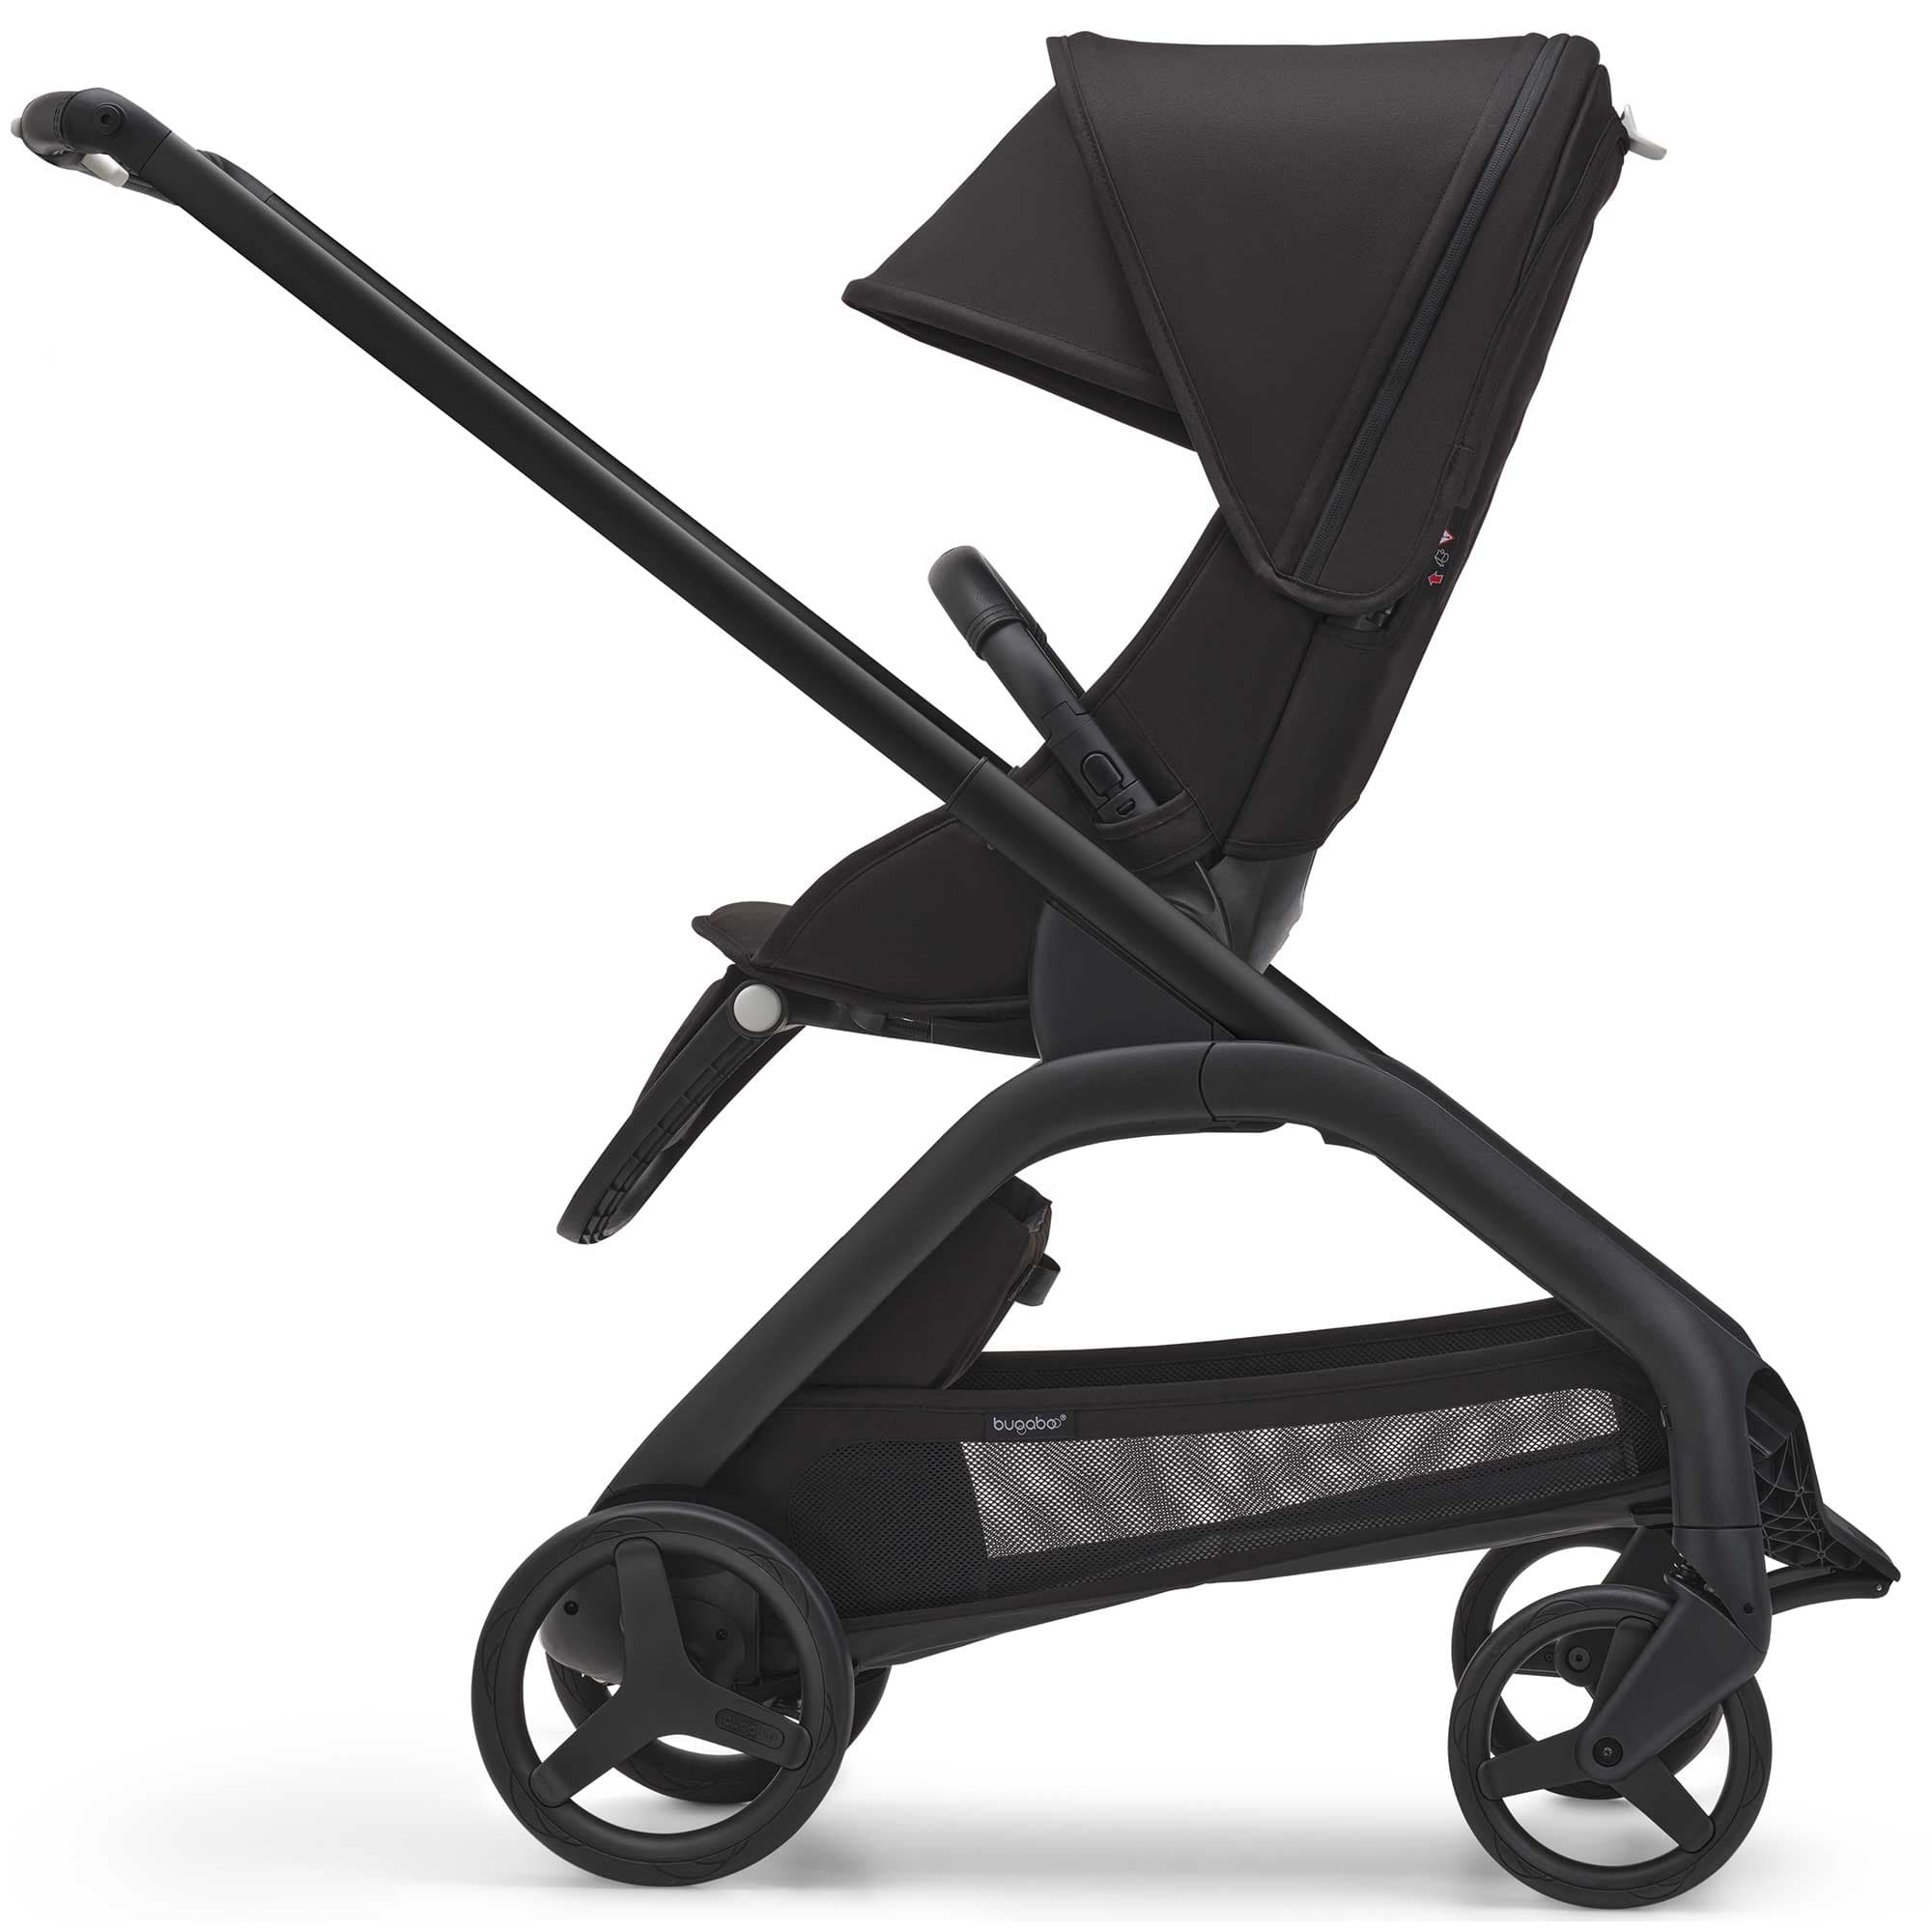 Bugaboo Travel Systems Bugaboo Dragonfly Pebble 360 Pro Travel System - Black/Midnight Black 13817-BLK-MID-BLK